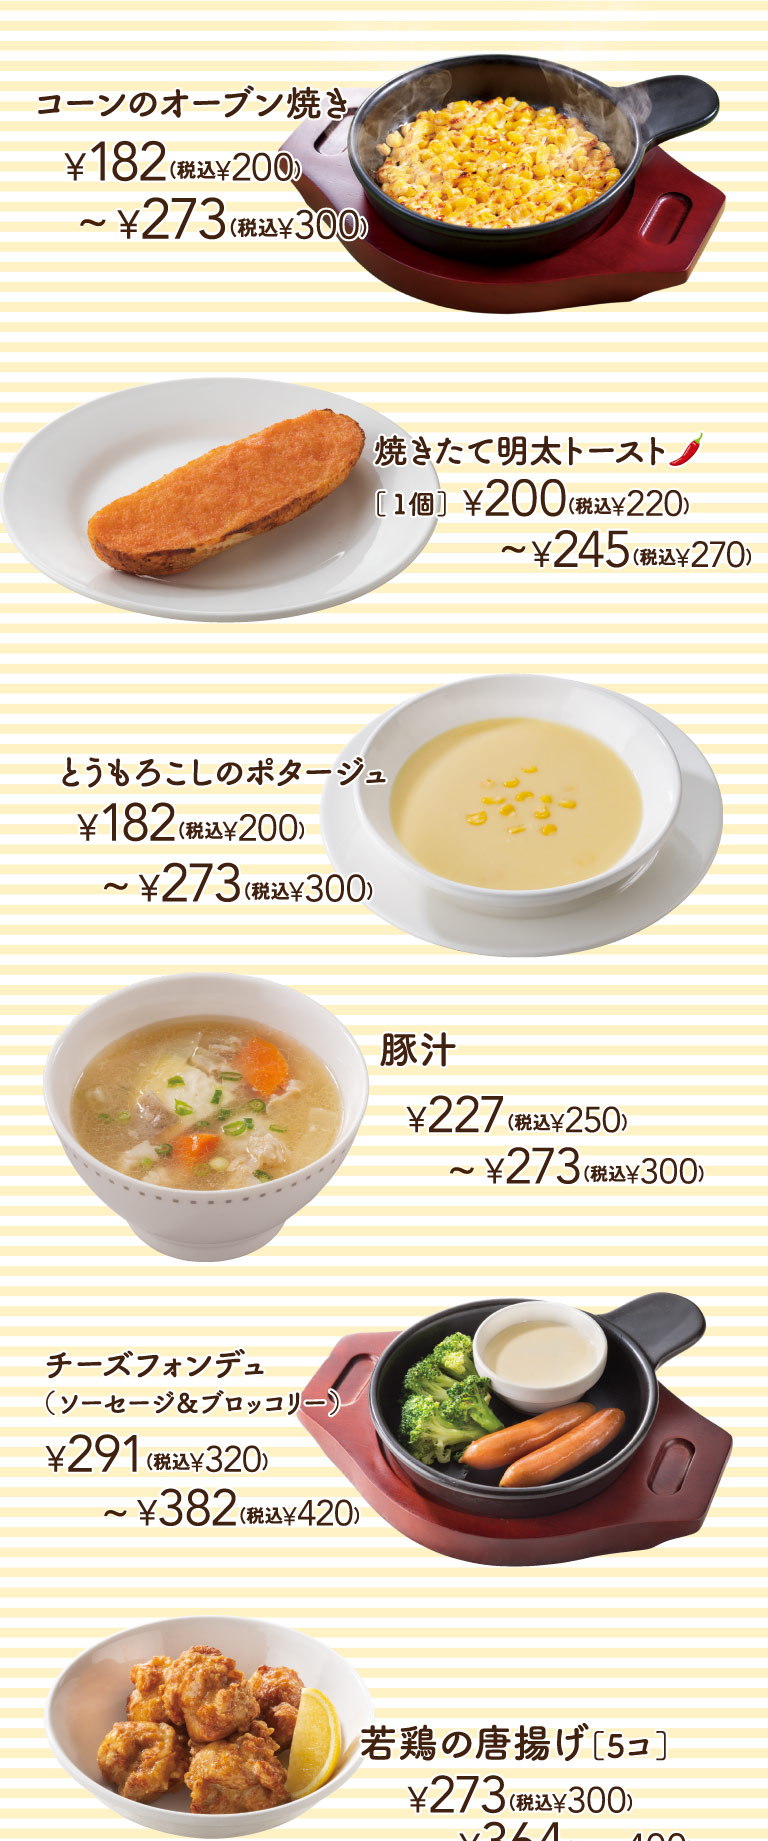 Oven Baked Corn, freshly baked pollack toast [1 piece], Corn Potage Soup, Cheese Fondue (Sausage & Broccoli), fried chicken [5 pieces]